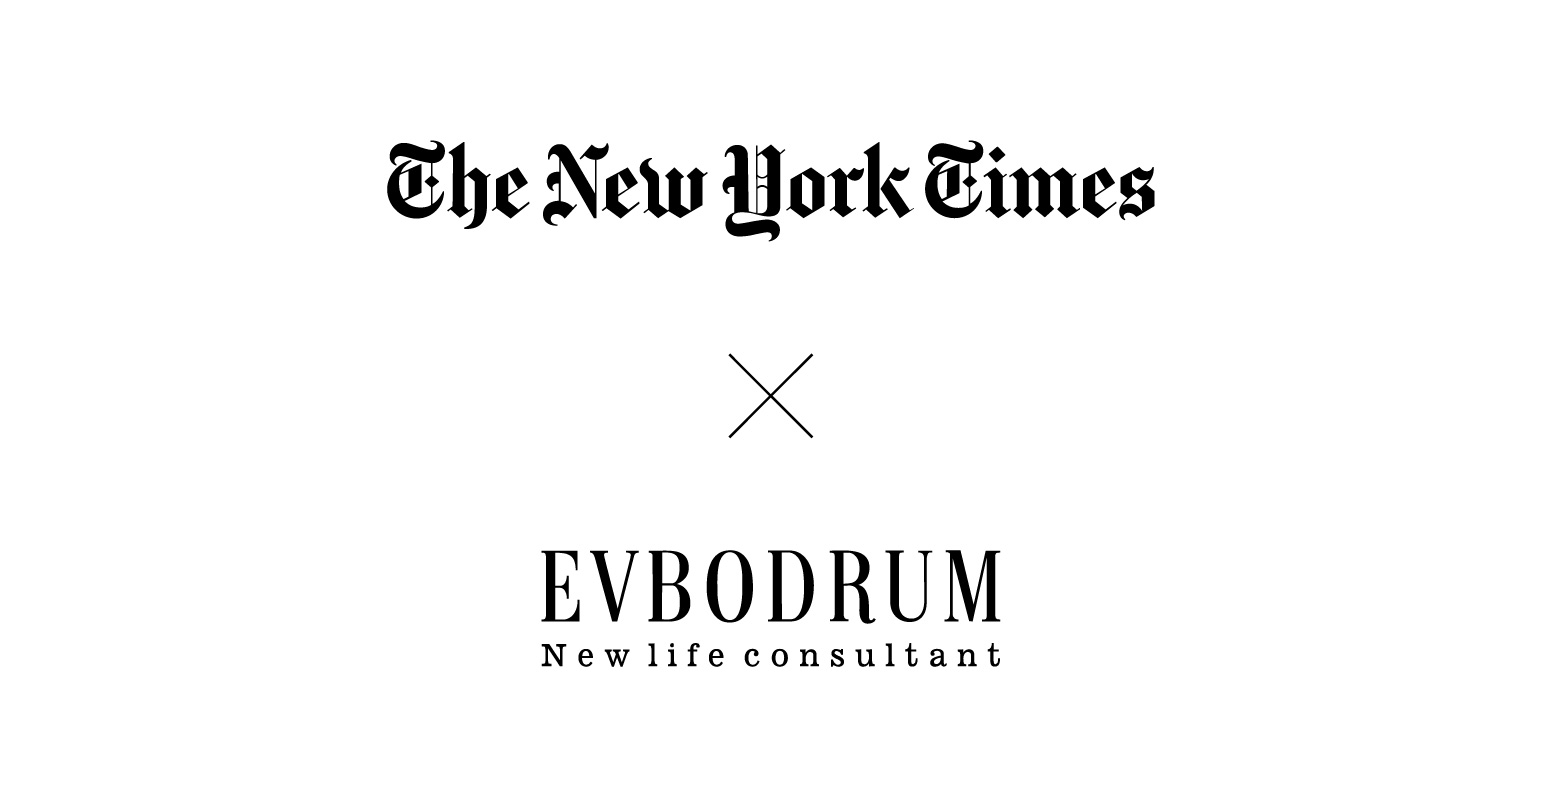 EVBodrum in The New York Times '20